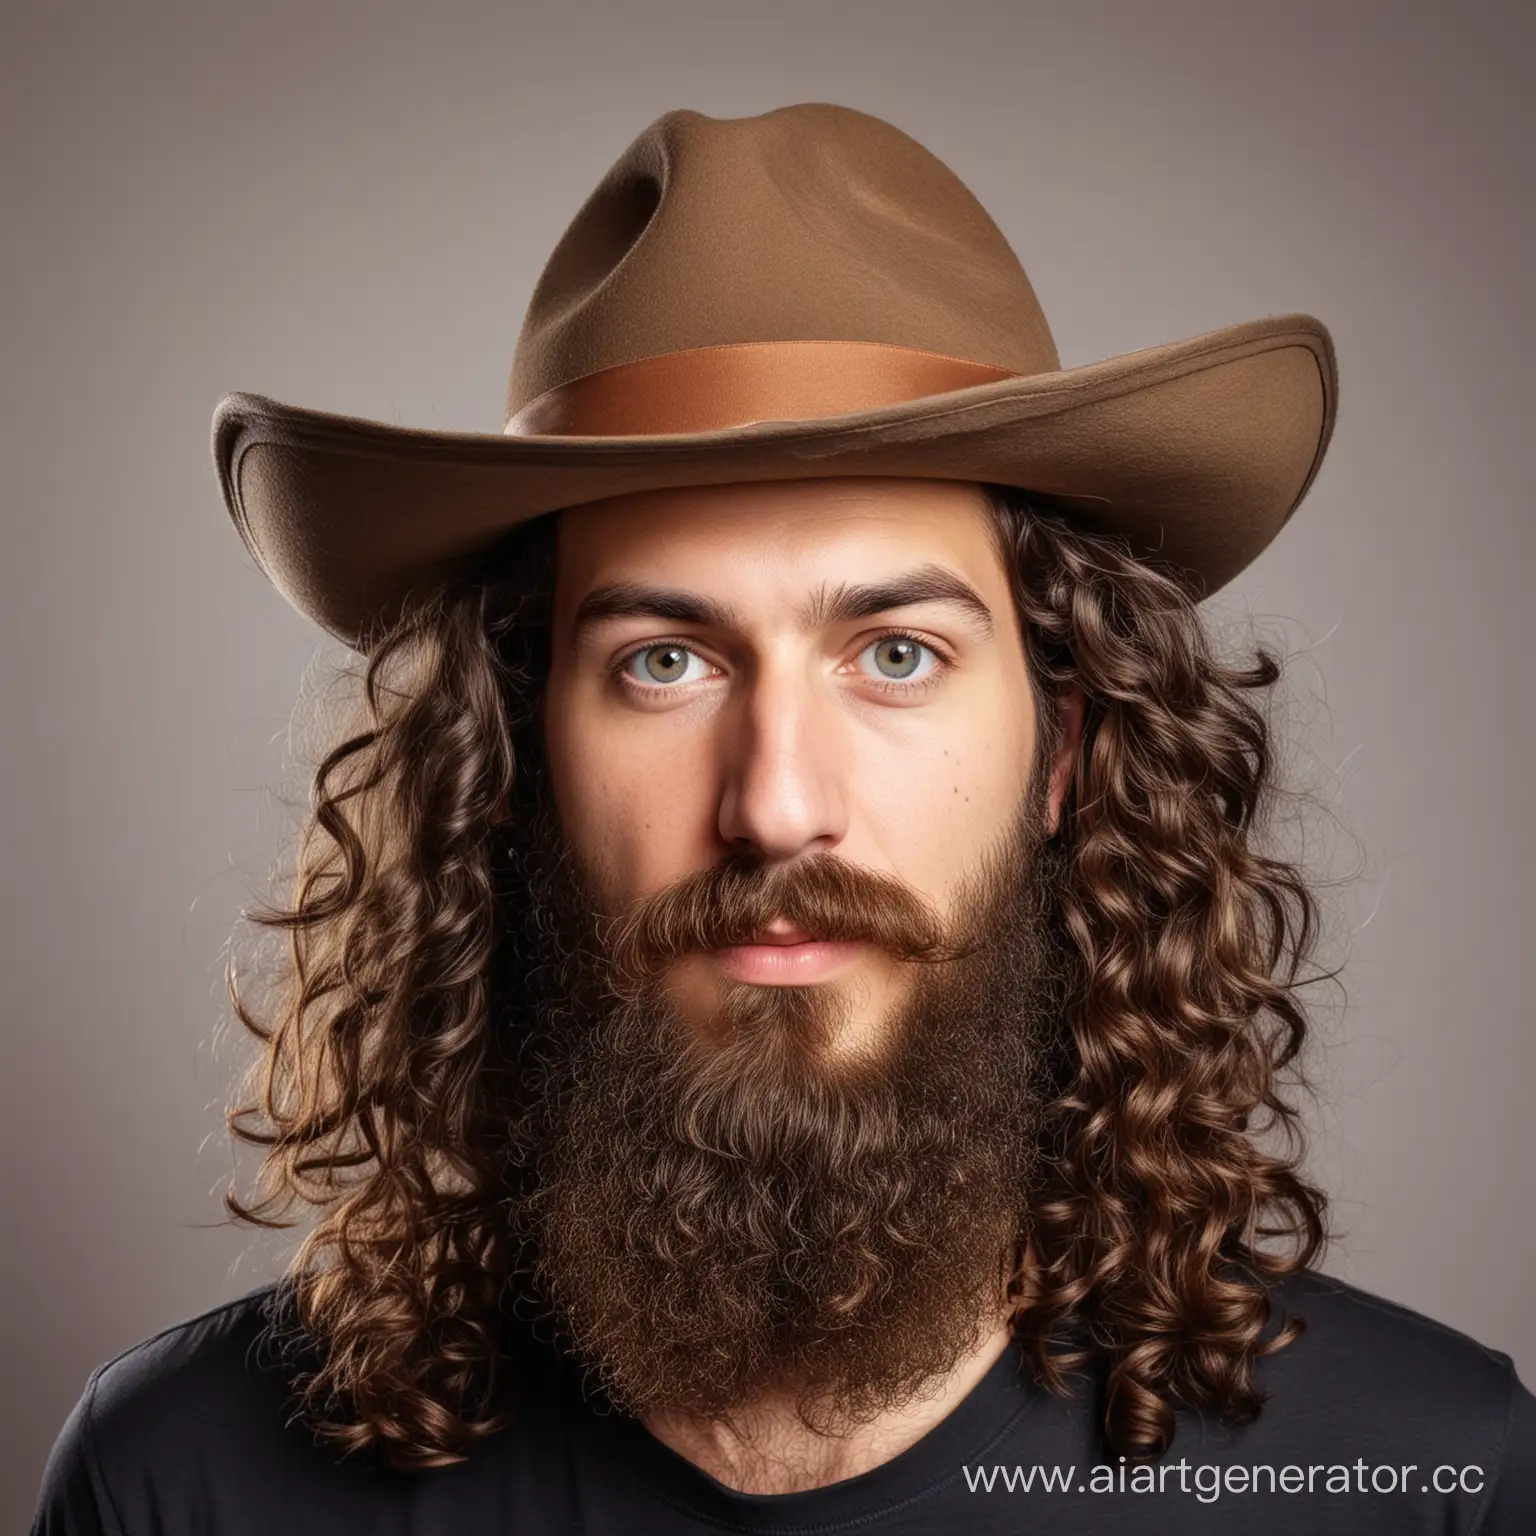 Portrait-of-a-Man-with-Curly-Hair-Mustache-Beard-and-Funny-Hat